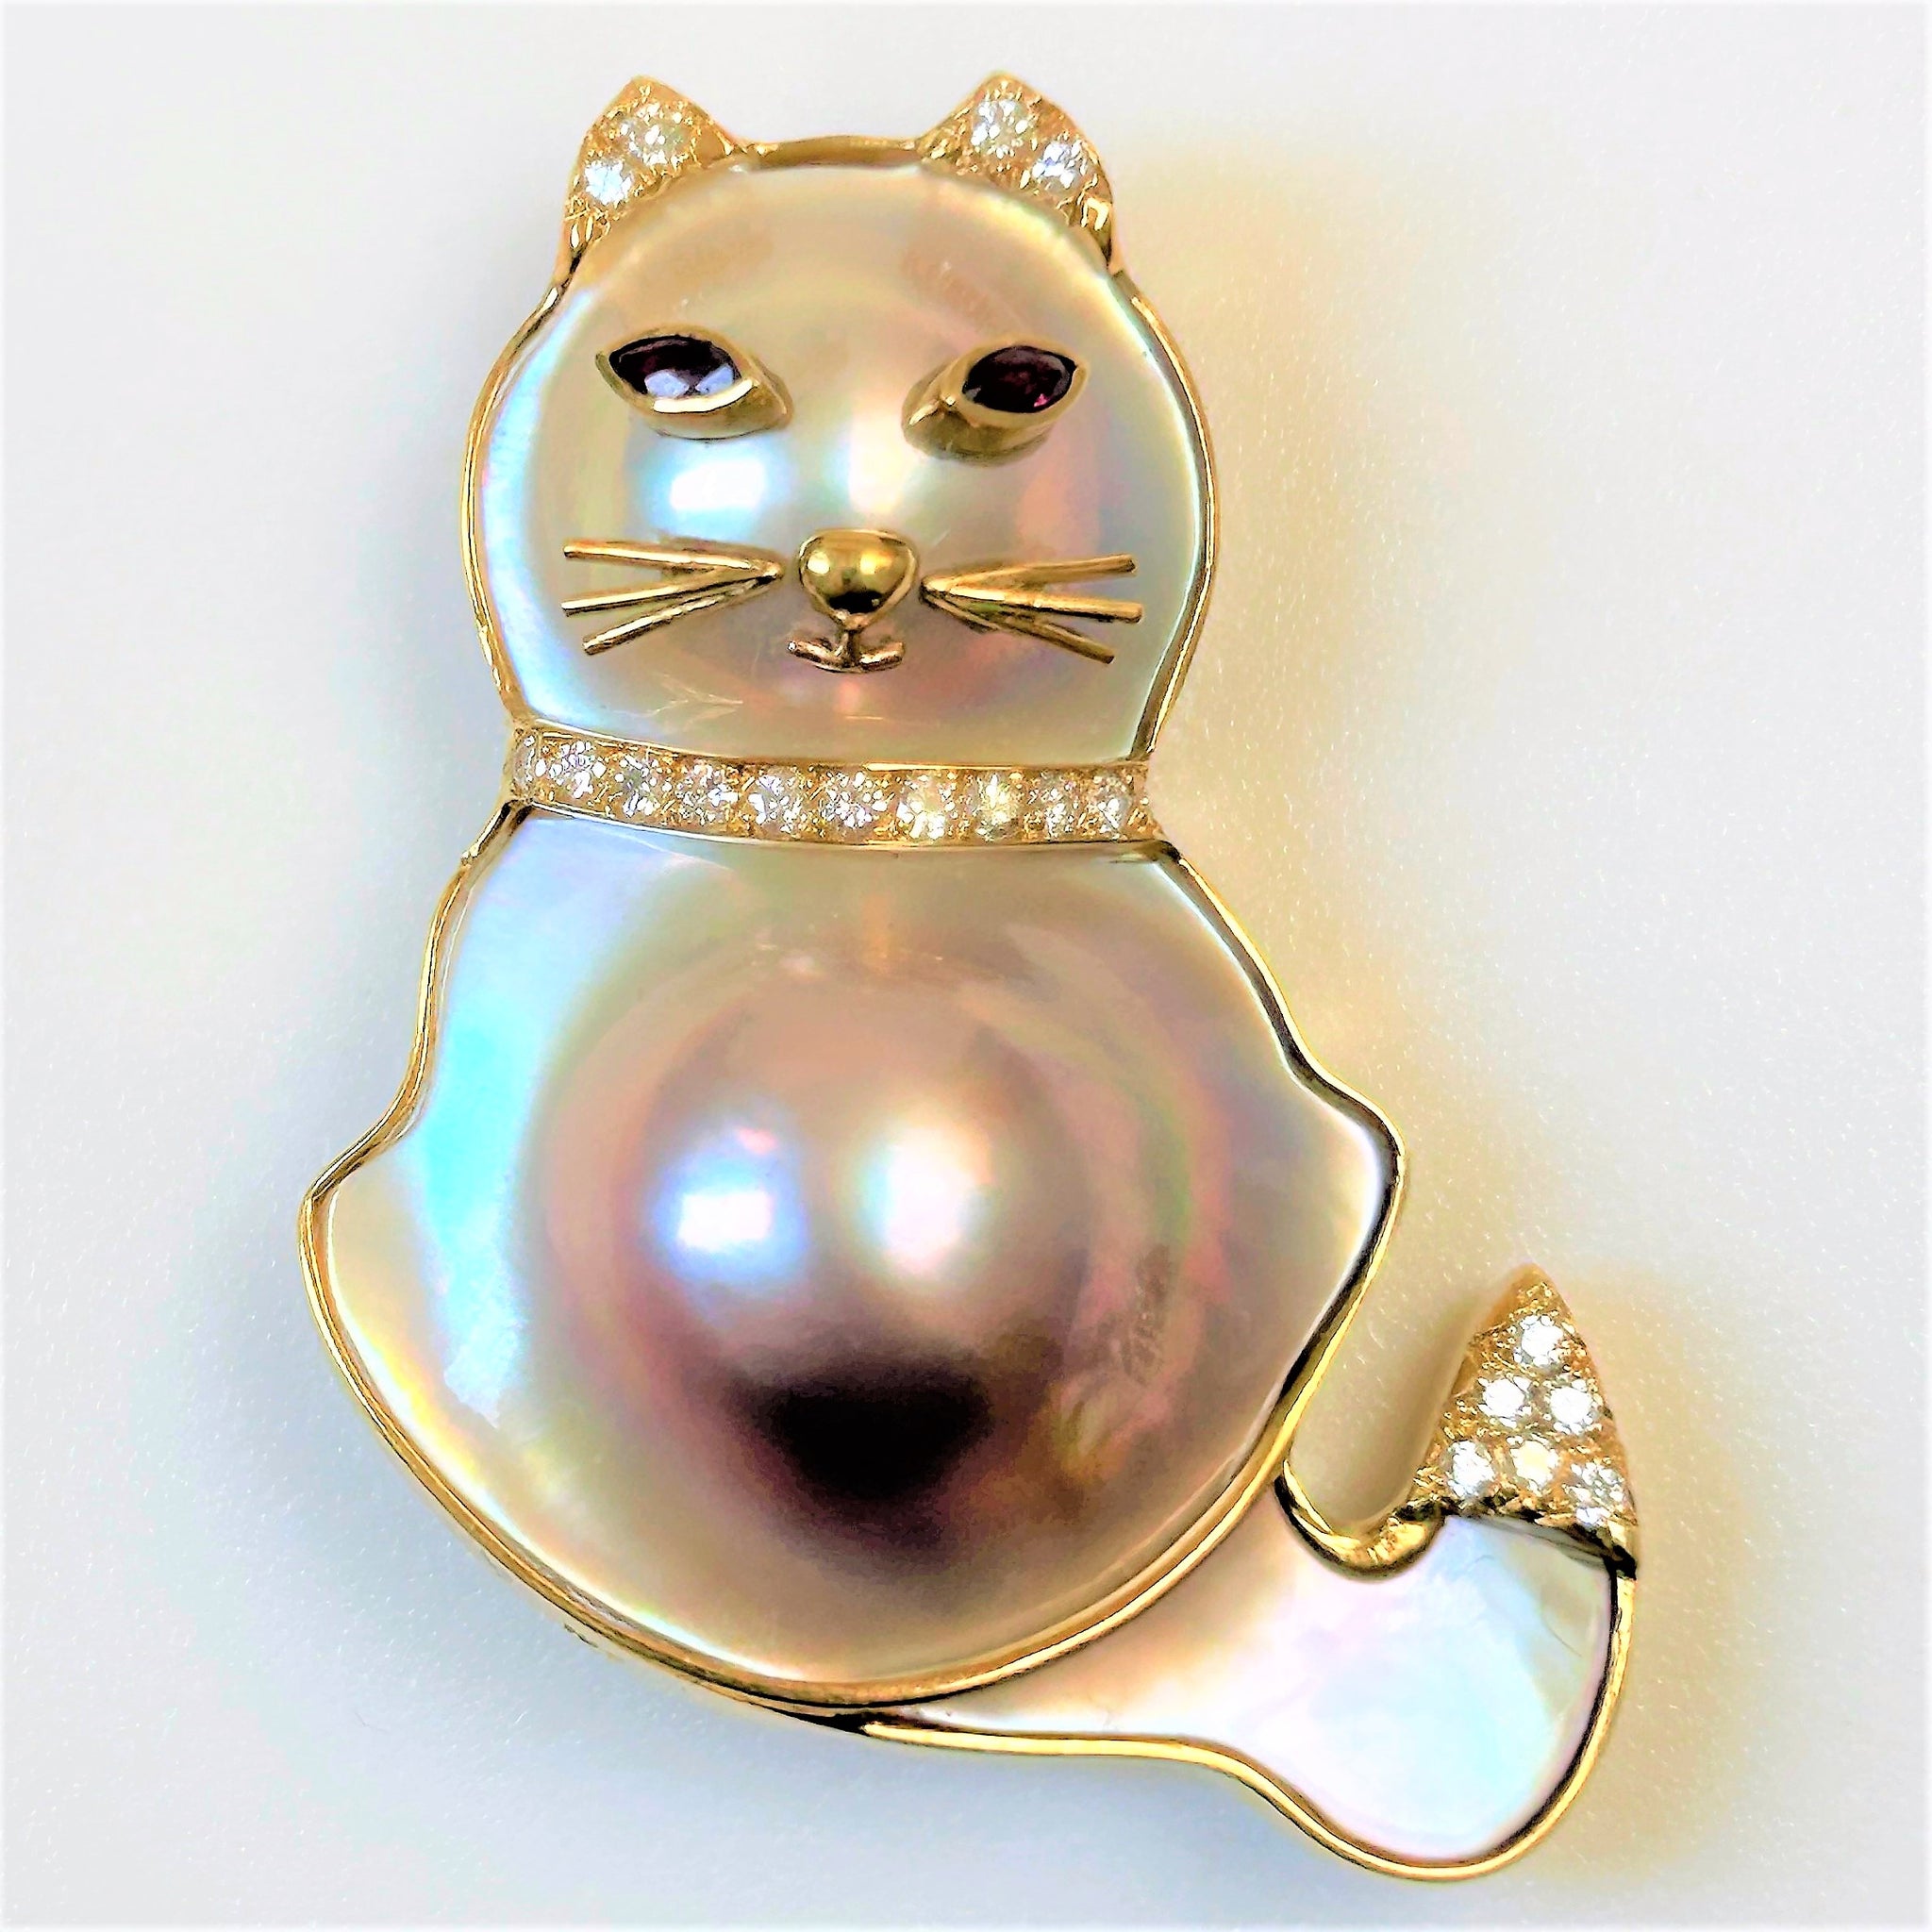 Vintage 18ct Gold, Pearl, Ruby and Diamond “Cat” Brooch